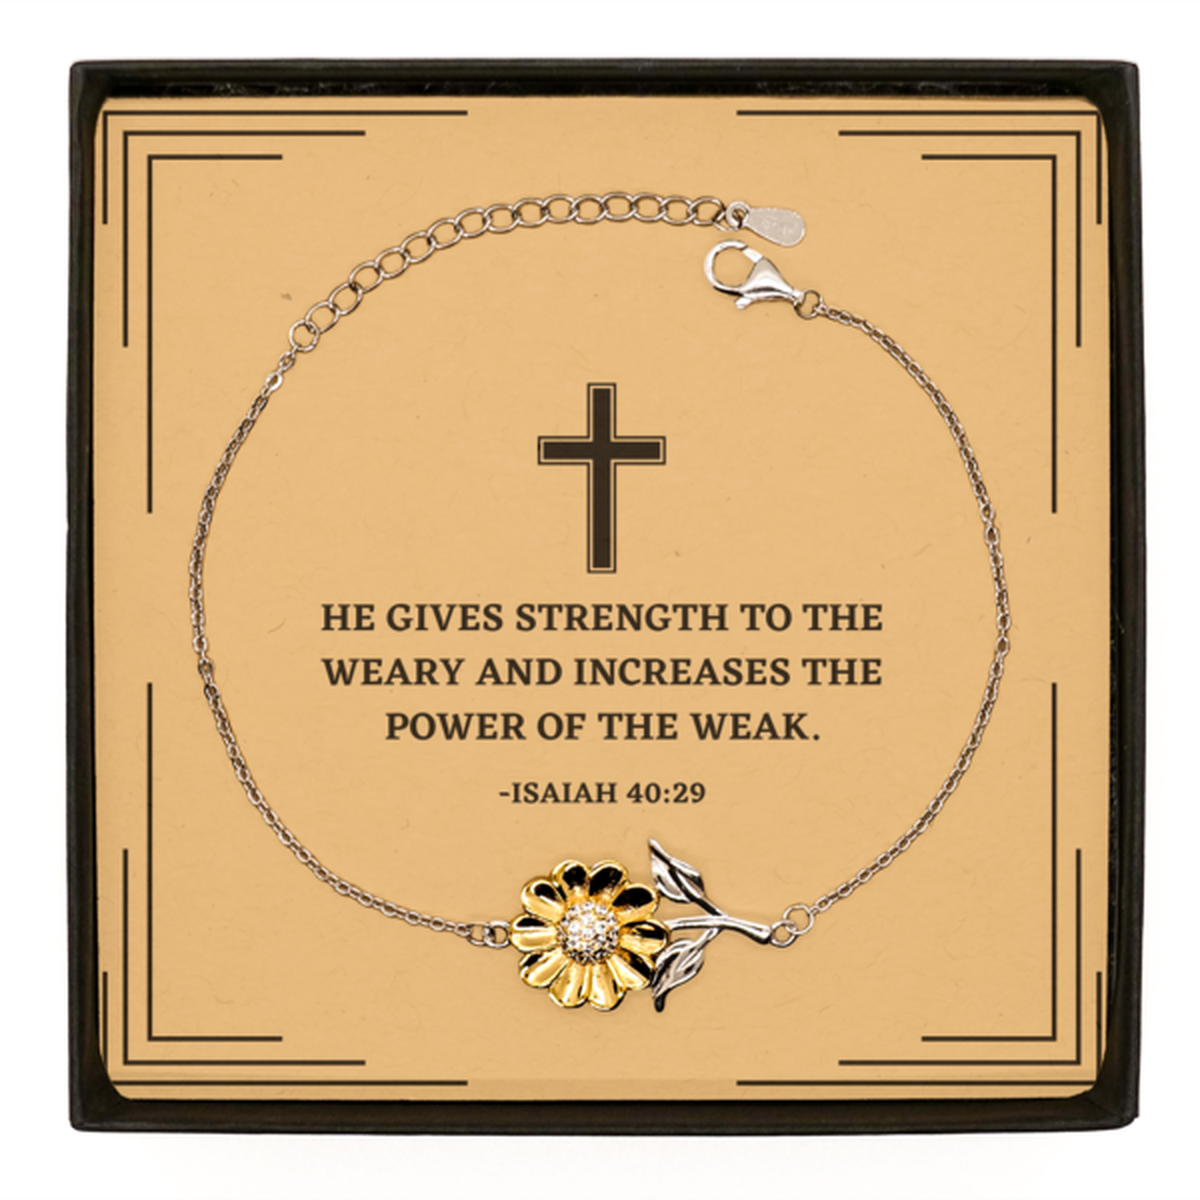 Baptism Gifts For Teenage Boys Girls, Christian Bible Verse Sterling Silver Sunflower Bracelet, He gives strength to the weary, Confirmation Gifts, Bible Verse Card for Son, Godson, Grandson